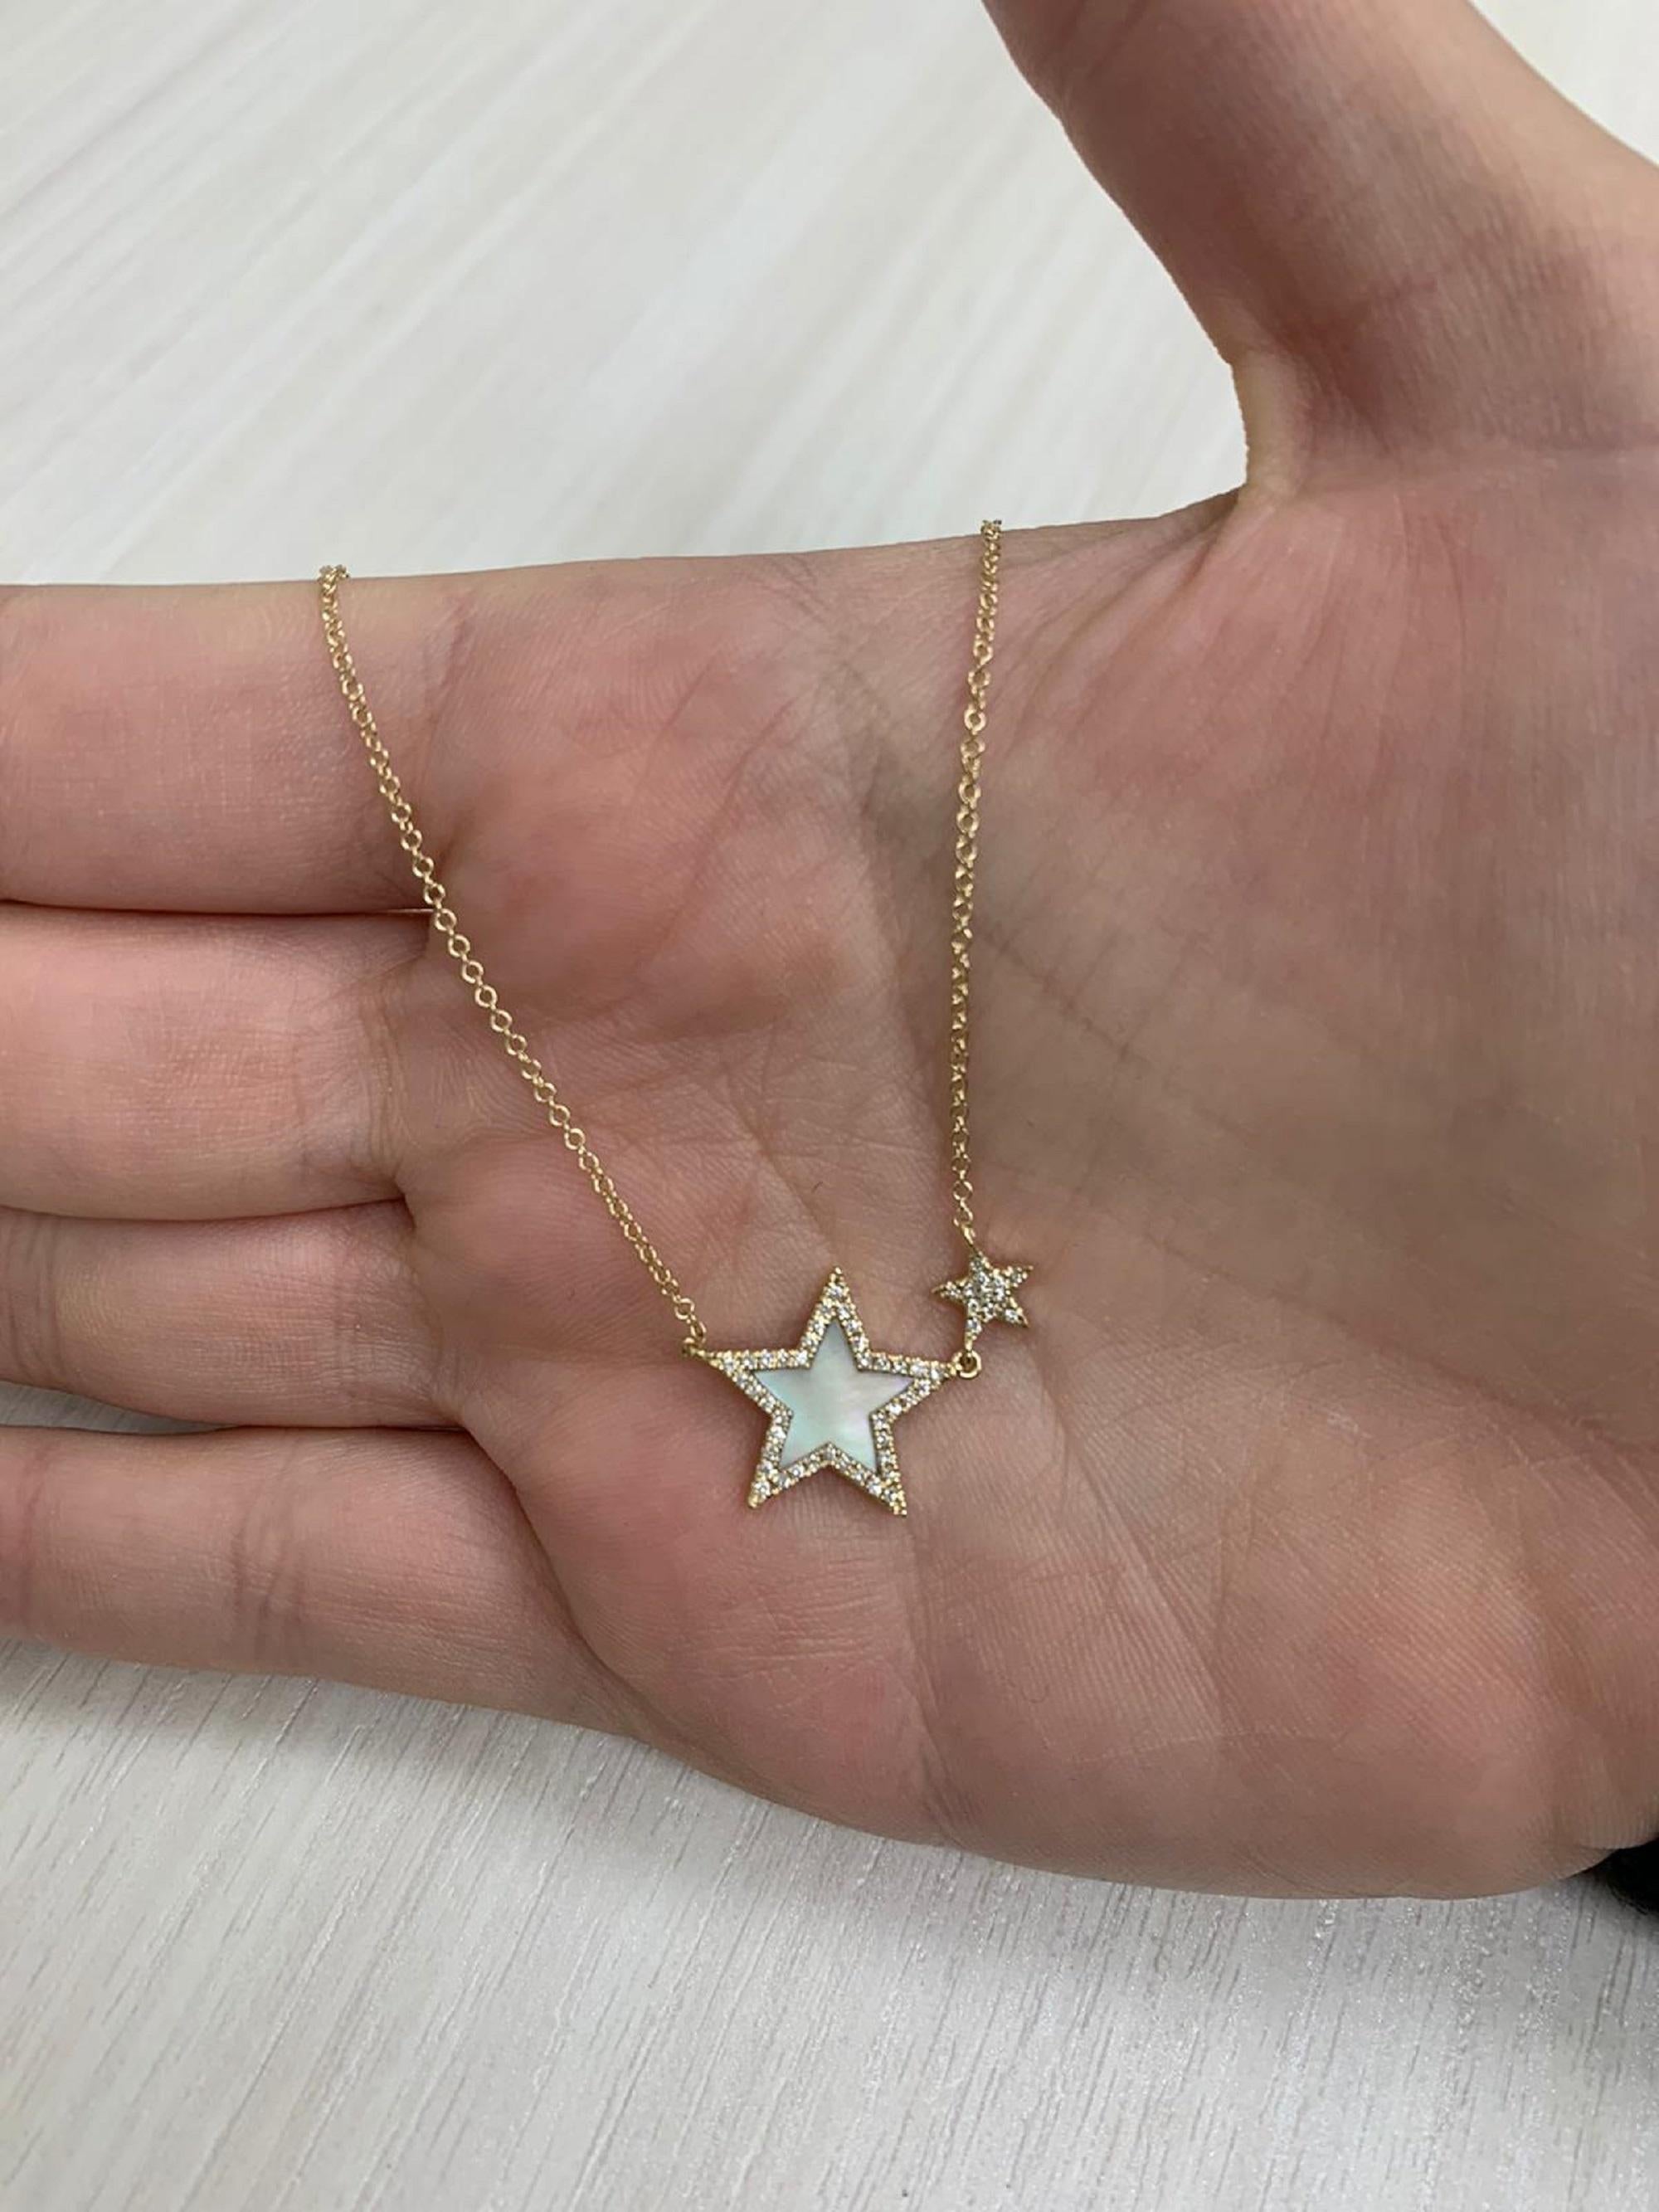 This Stunning and Elegant Star Necklace features 0.48 carats of Mother of Pearl and has 0.15 carats of natural round Diamonds hangs on an adjustable 16